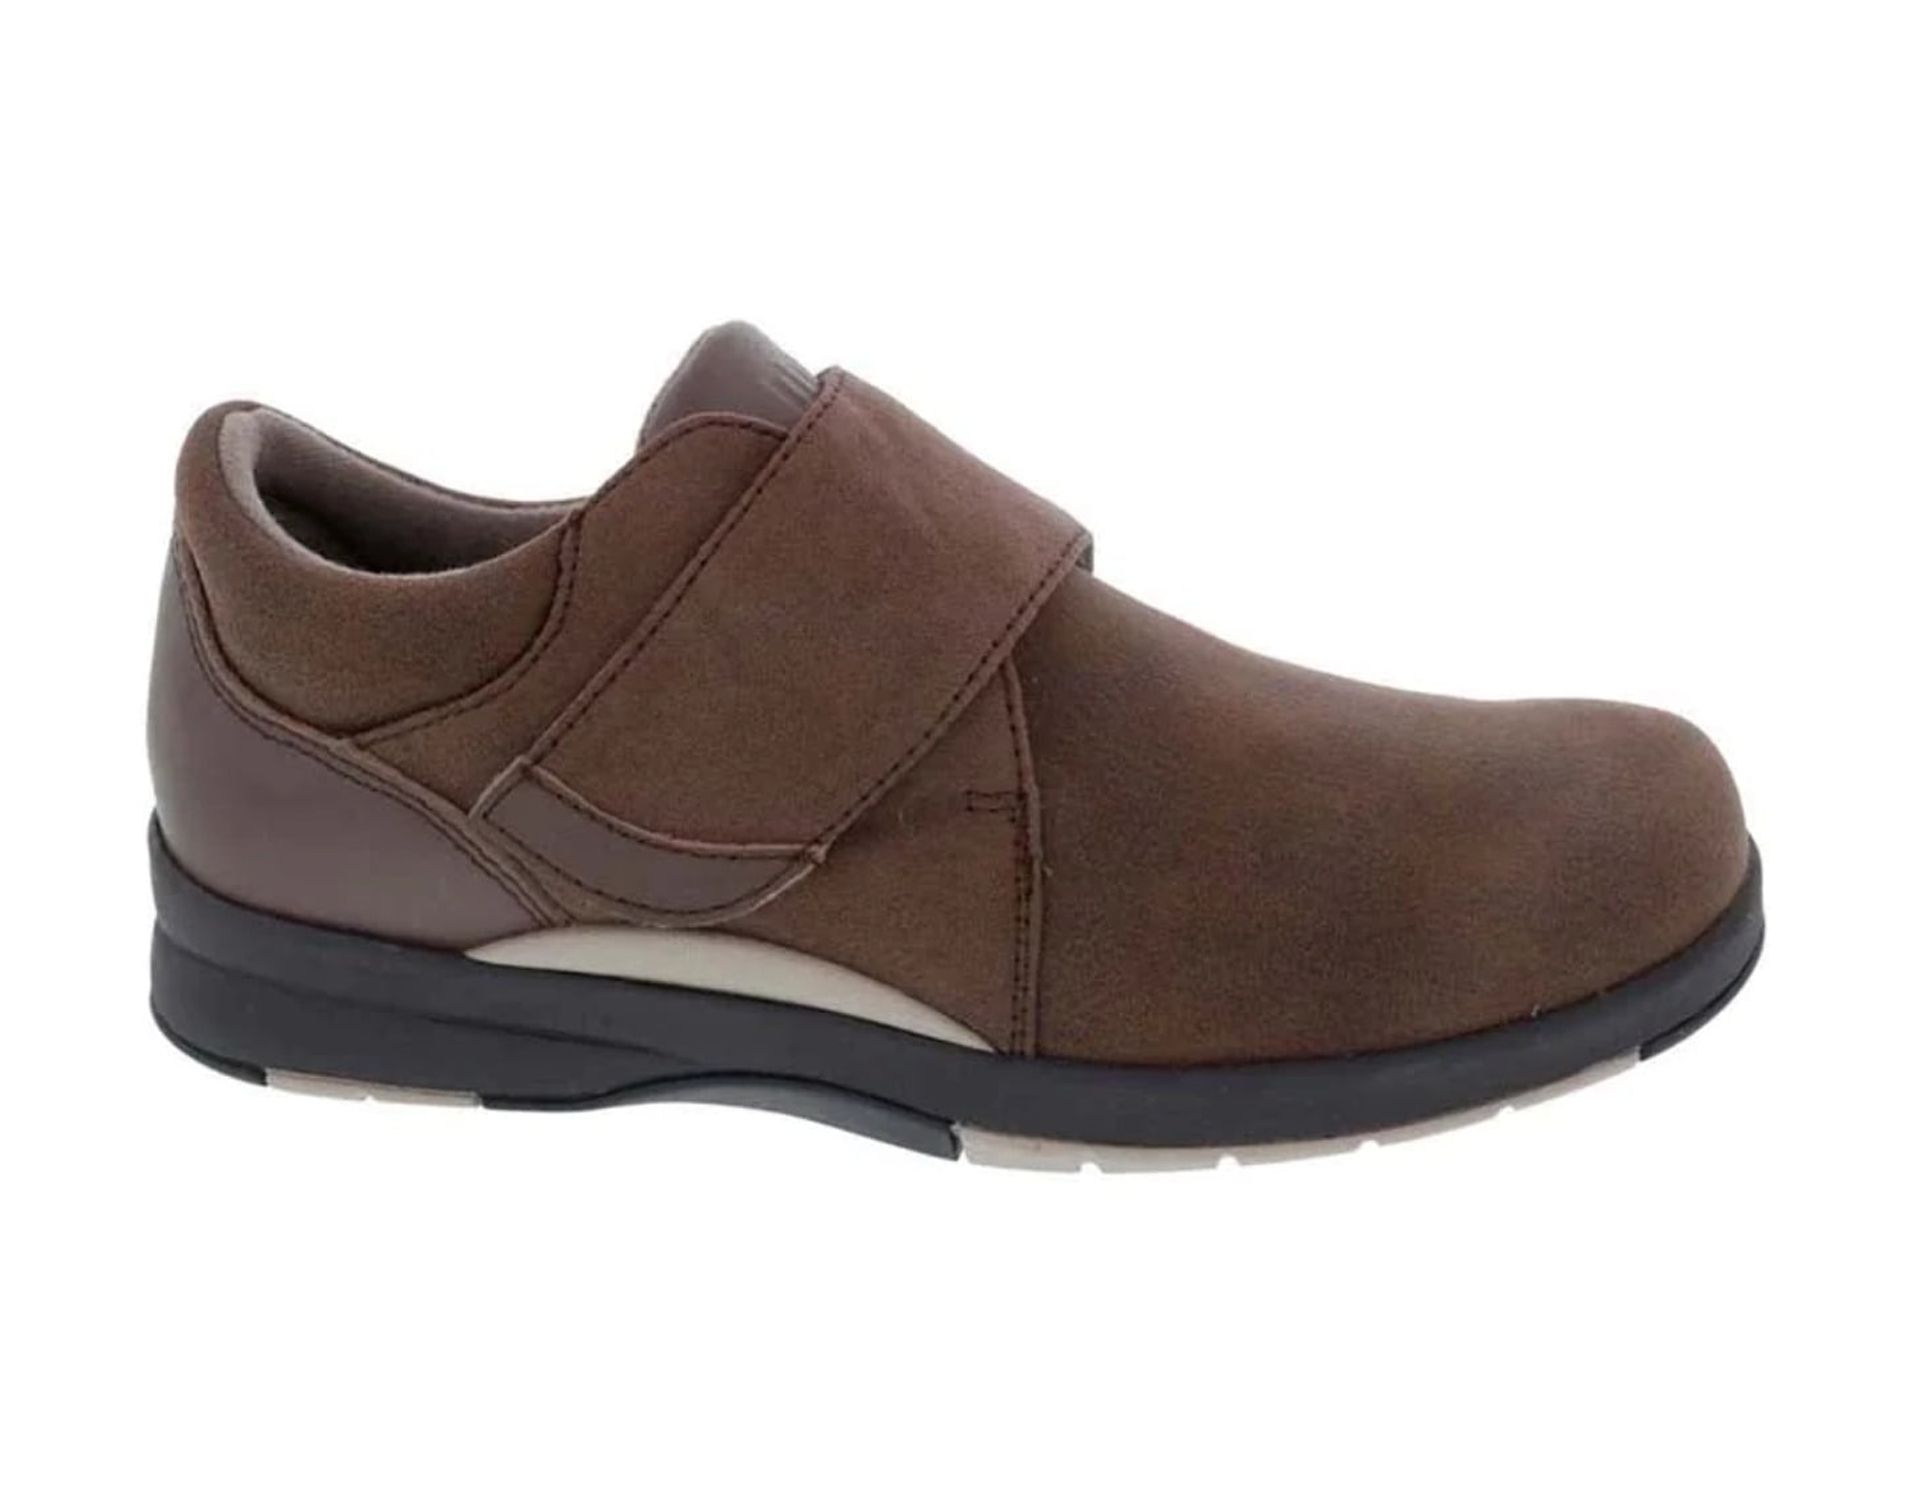 DREW MOONWALK WOMEN CASUAL SHOE IN BROWN STRETCH LEATHER - image 4 of 5